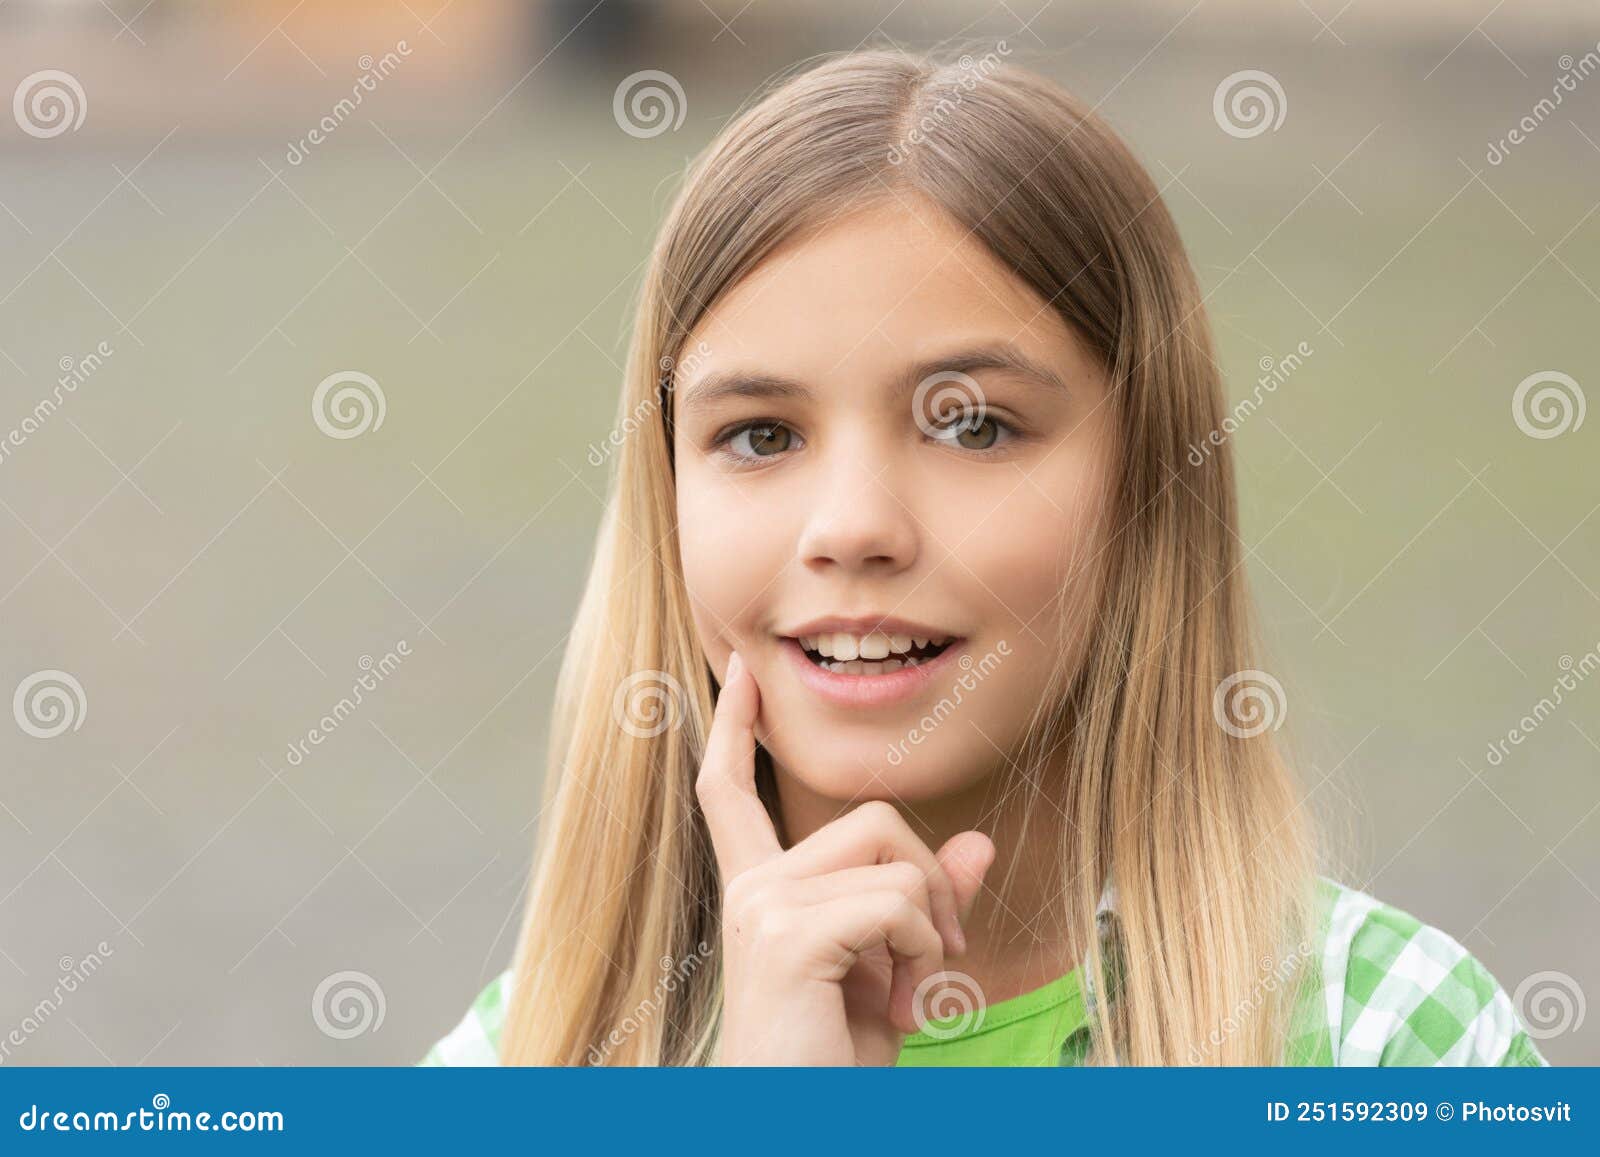 Portrait Of Happy Teenage Girl Smiling With Finger On Cheek Blurry Outdoors Stock Image Image